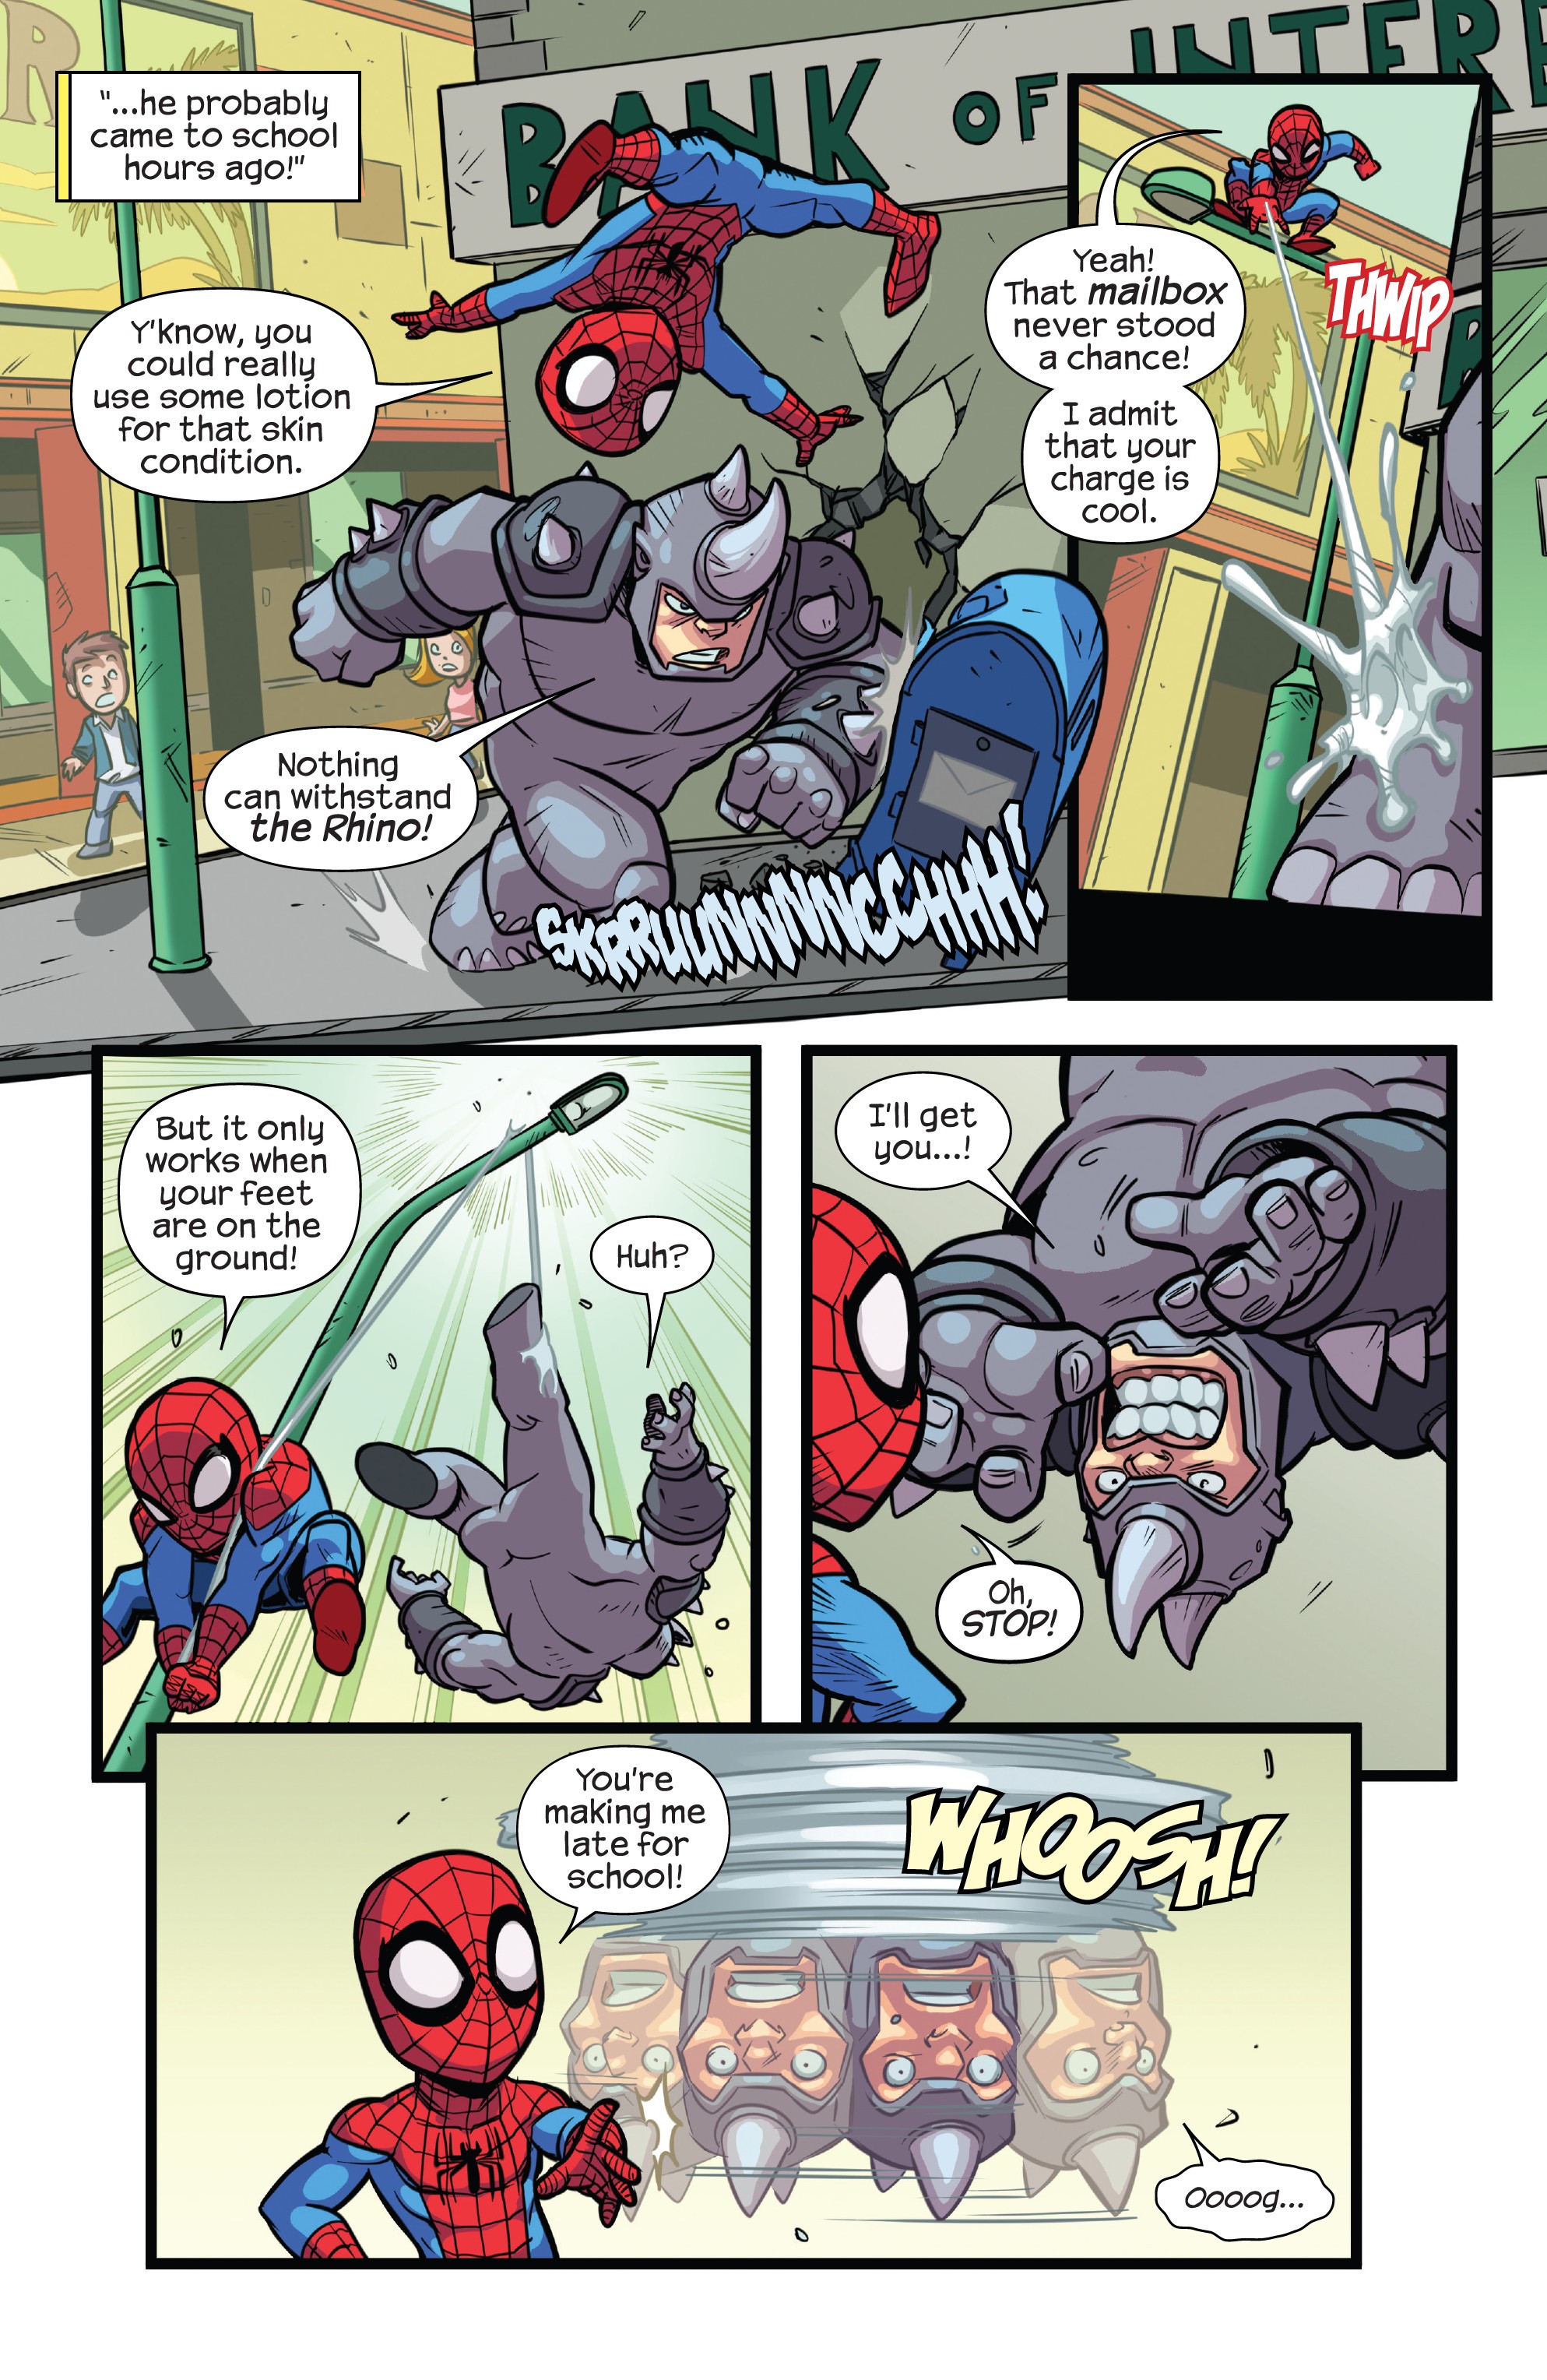 Marvel Super Hero Adventures: Captain Marvel - First Day Of School (2018): Chapter 1 - Page 4